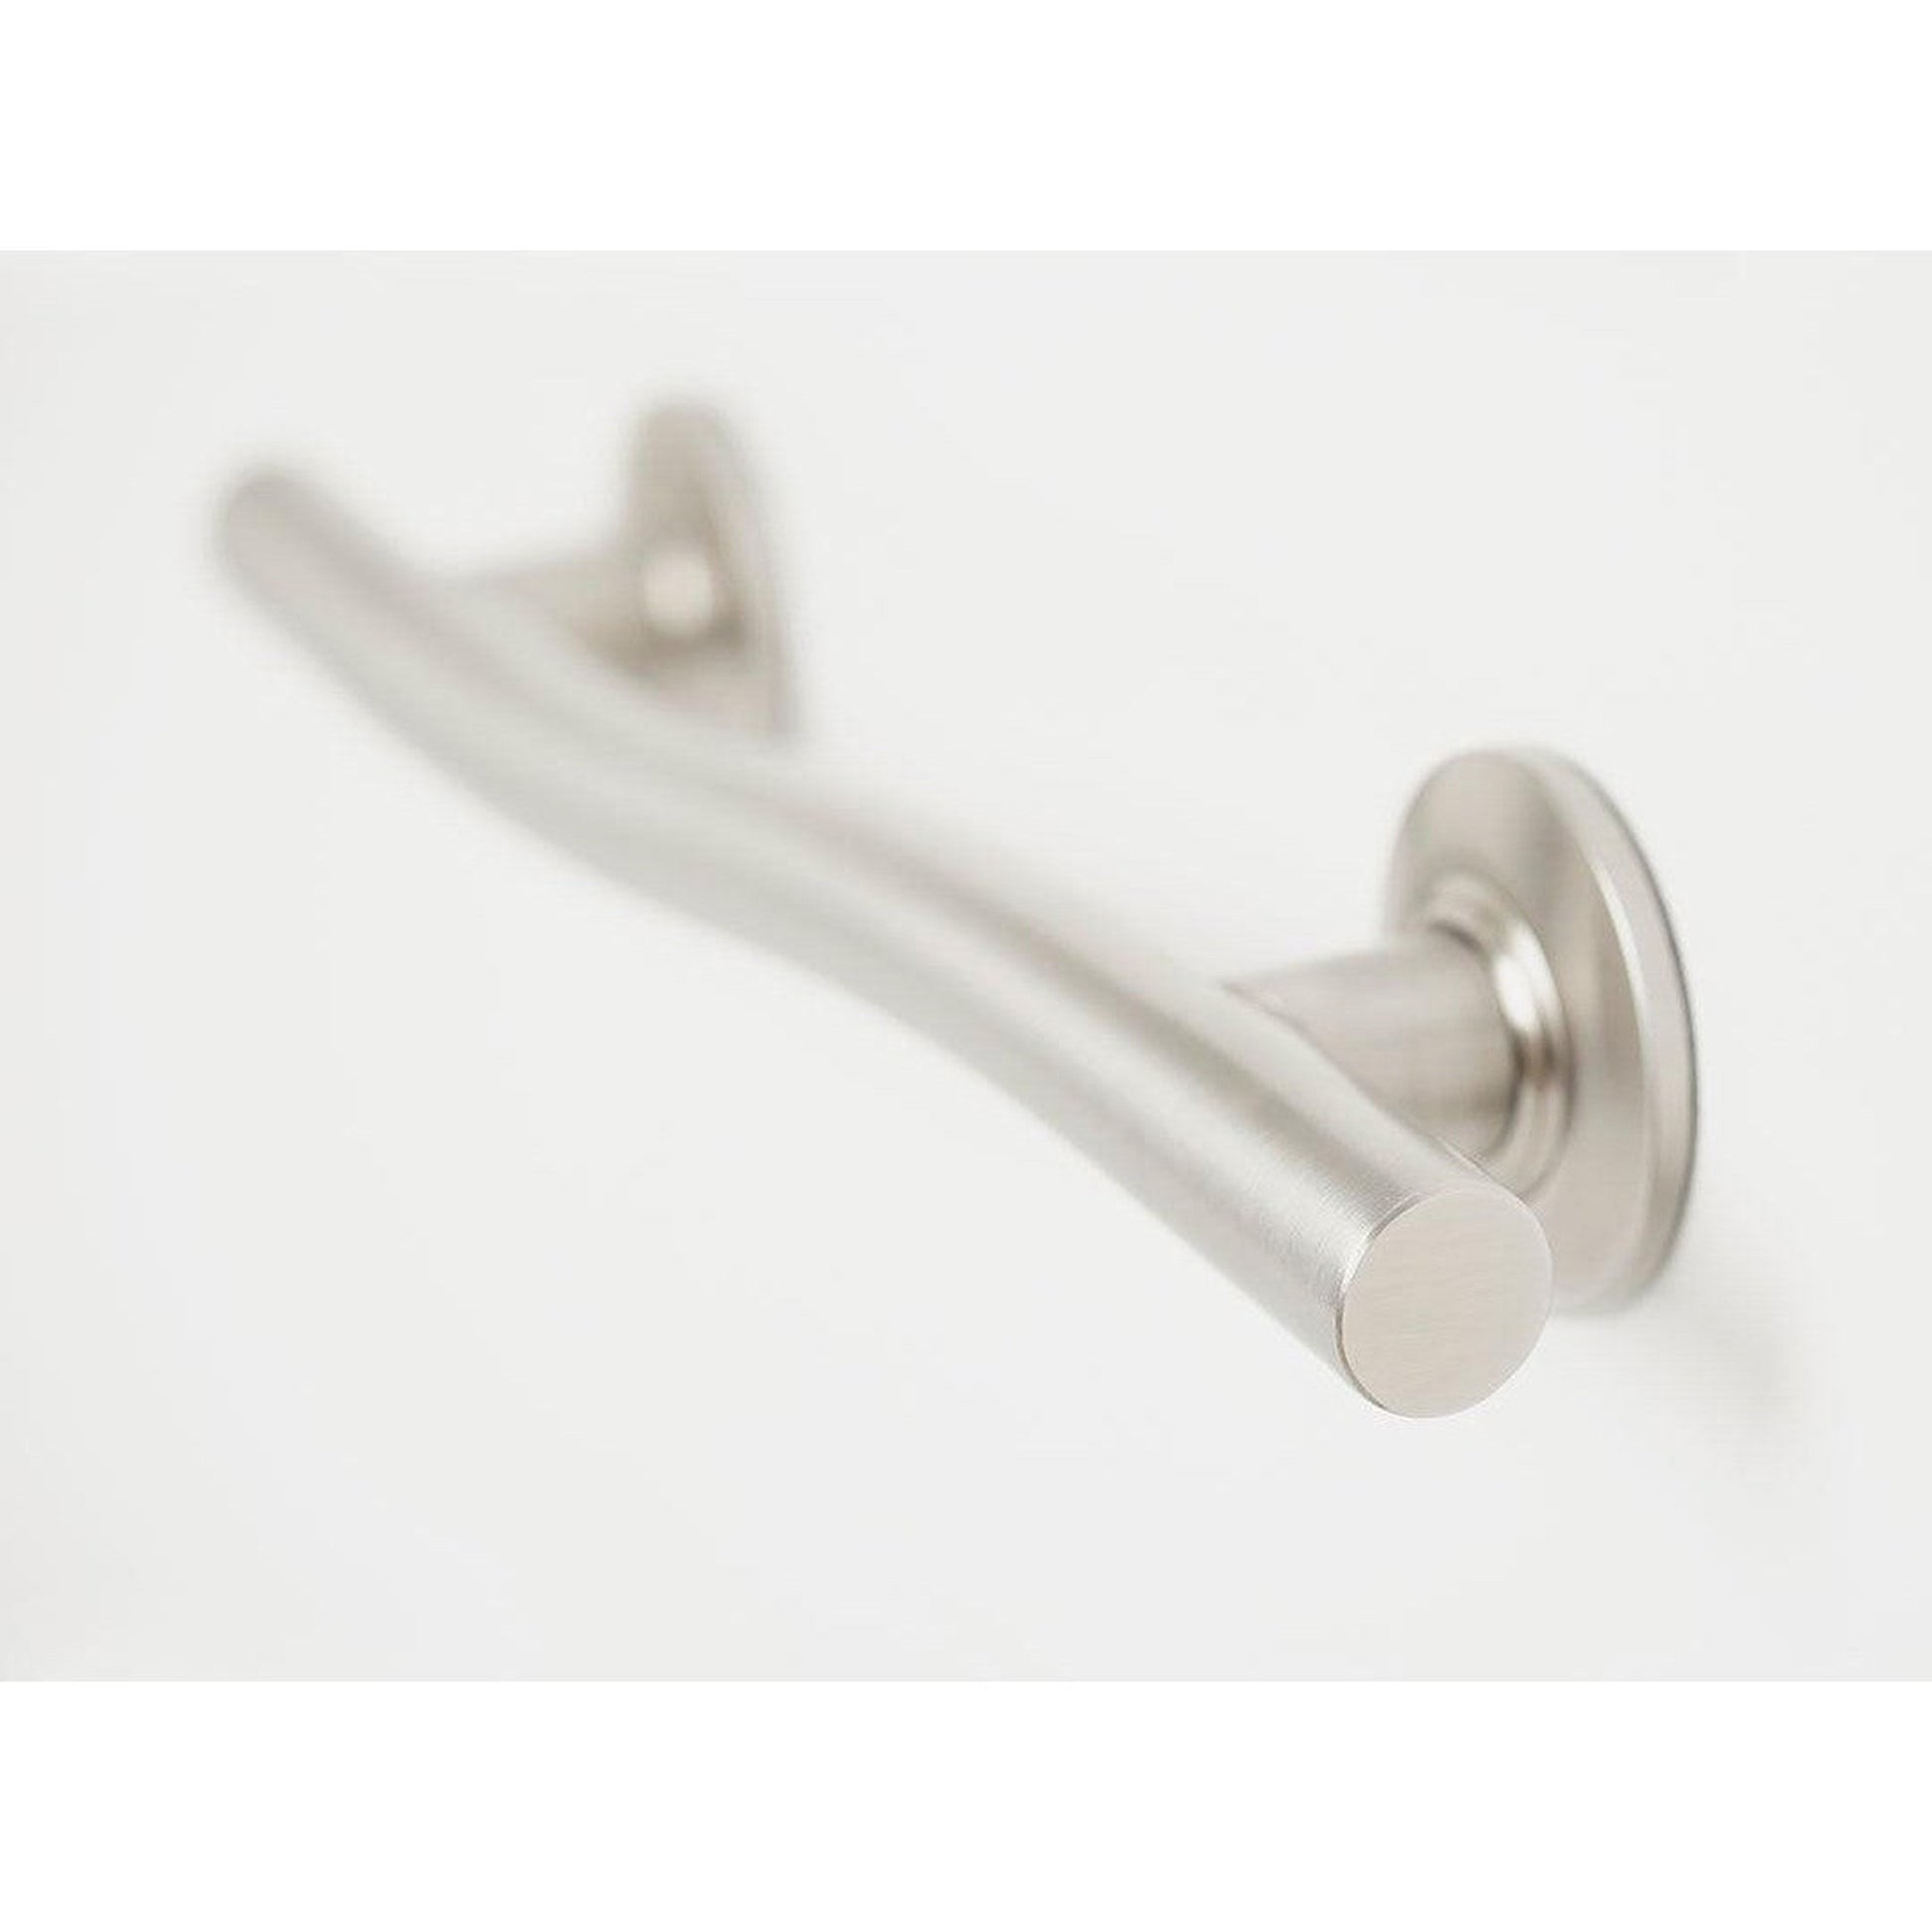 Seachrome Lifestyle & Wellness 48" Satin Stainless Steel 1.25 Diameter Concealed Flange Wave Grab Bar